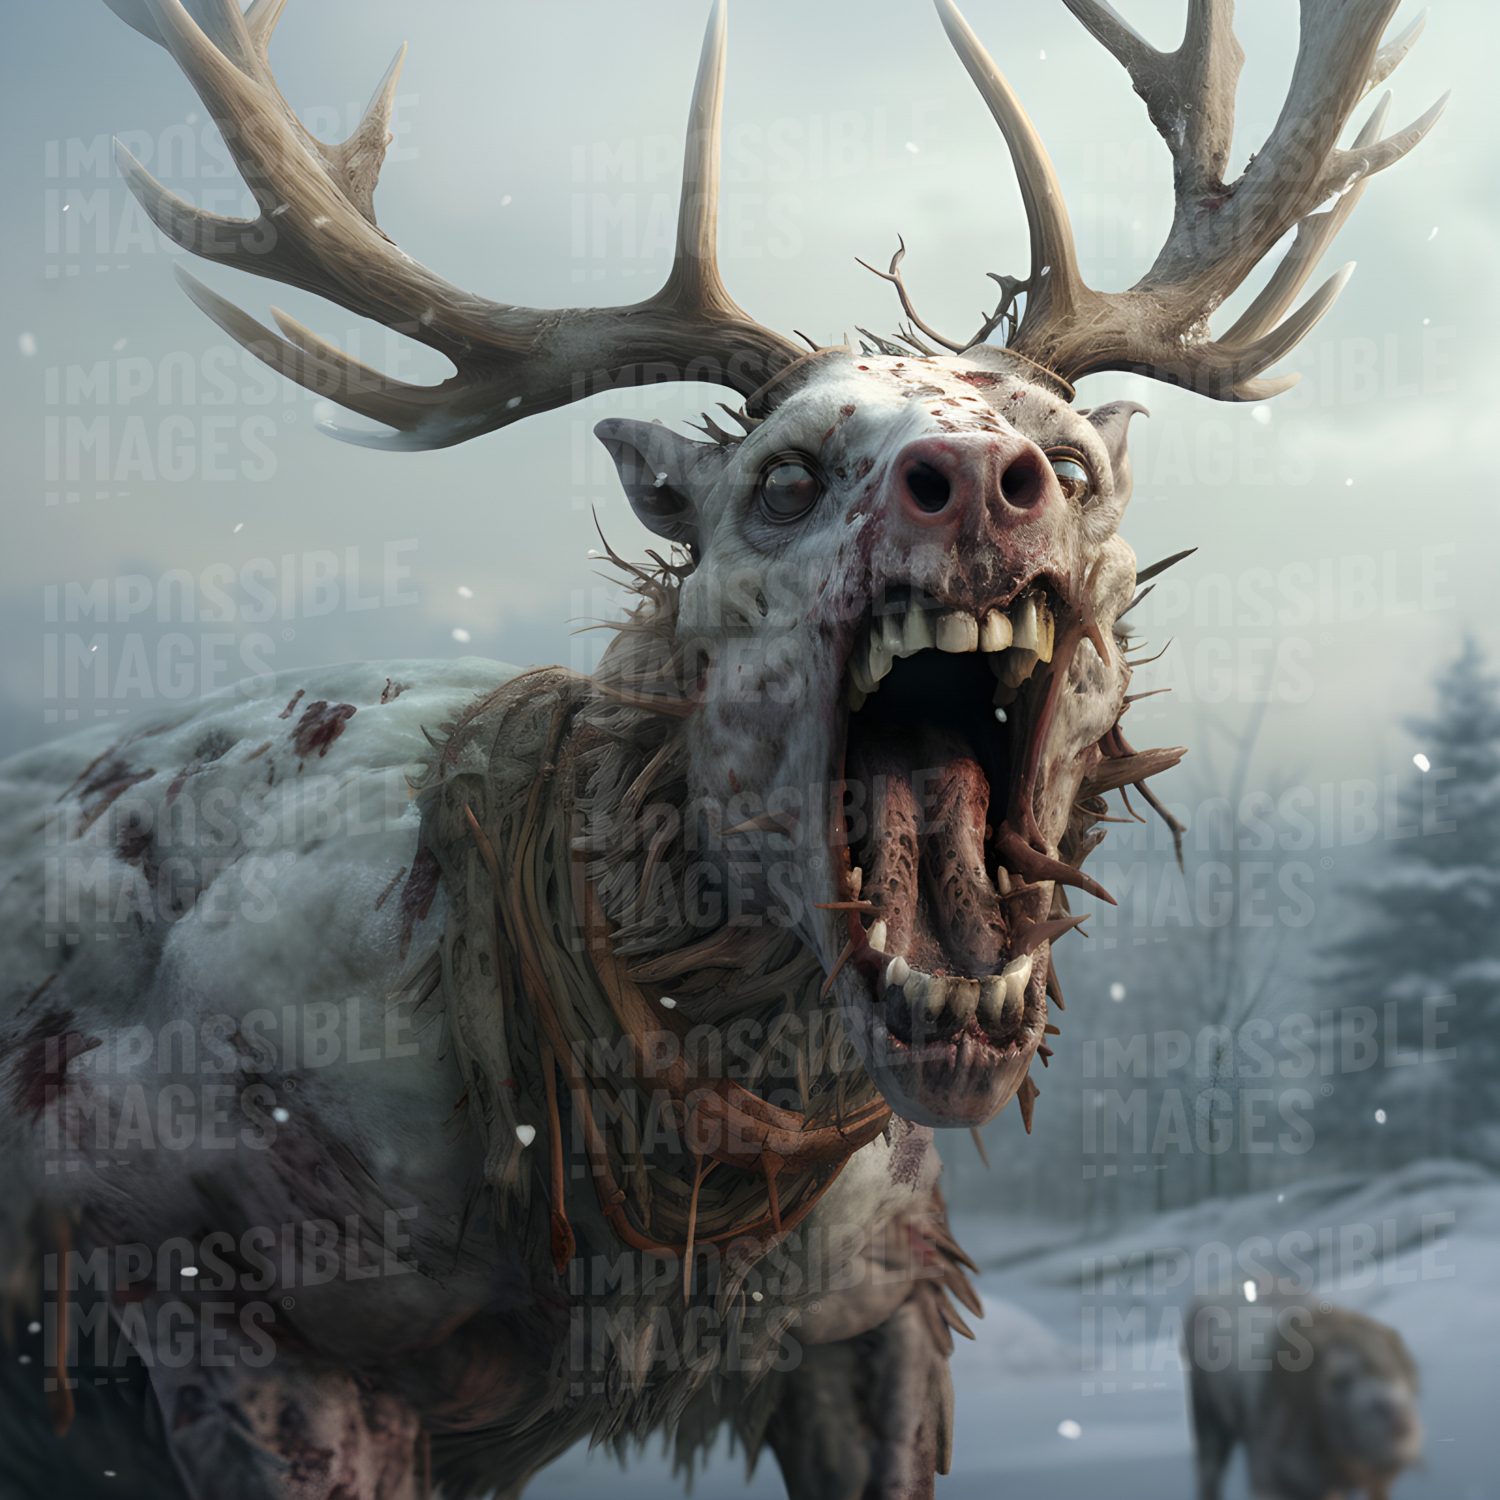 Zombie reindeer -  A zombie apocalypse has caused reindeer to become undead, wreaking havoc on the holiday season. Can Santa save Christmas?